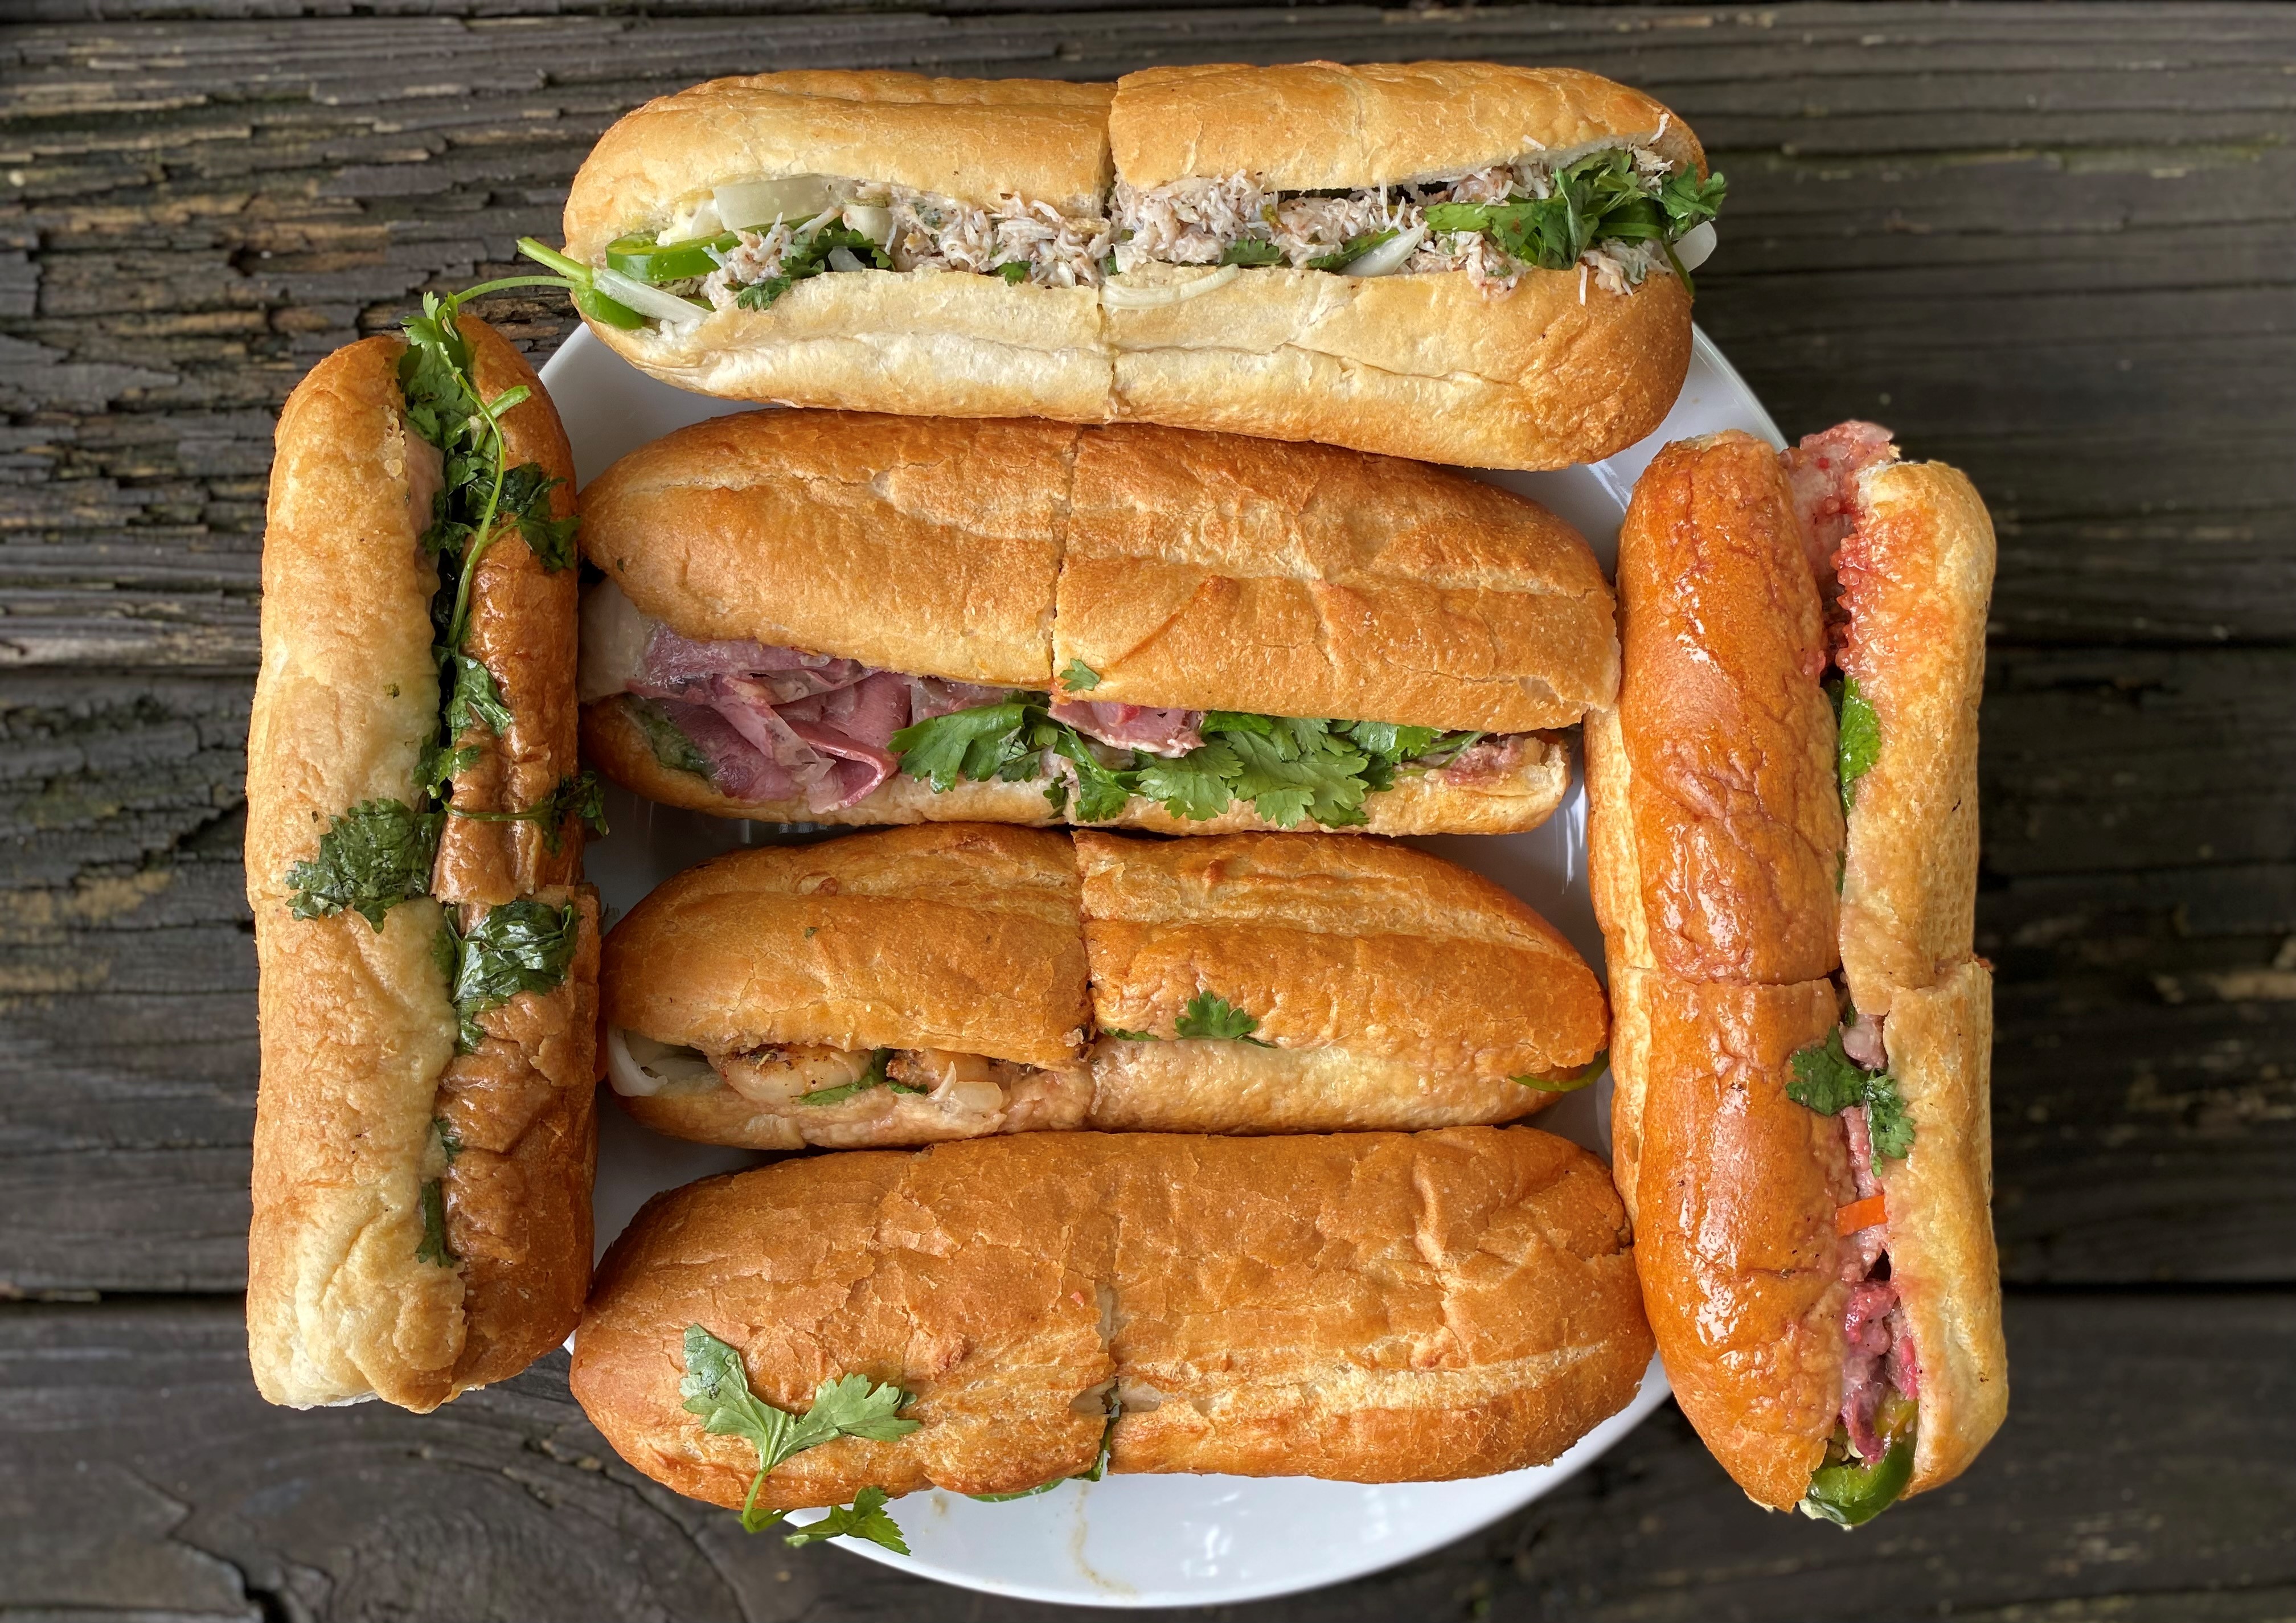 Lobster Banh Mi serves classic sandwiches at a remarkable price